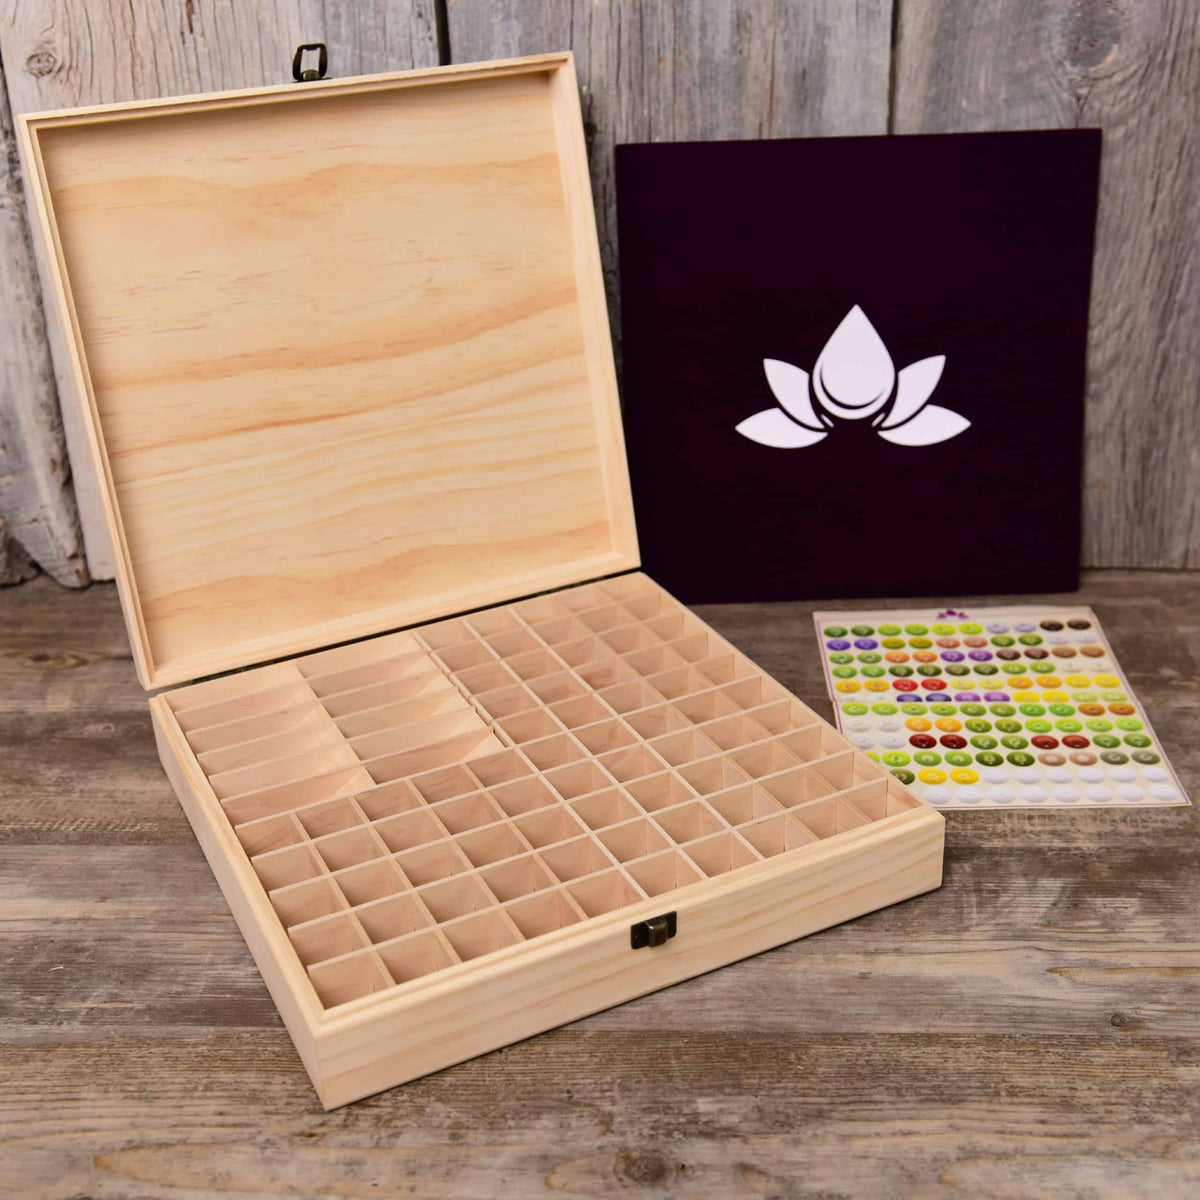 Essential Oil Box - Wooden Storage Case With Handle. Holds 75